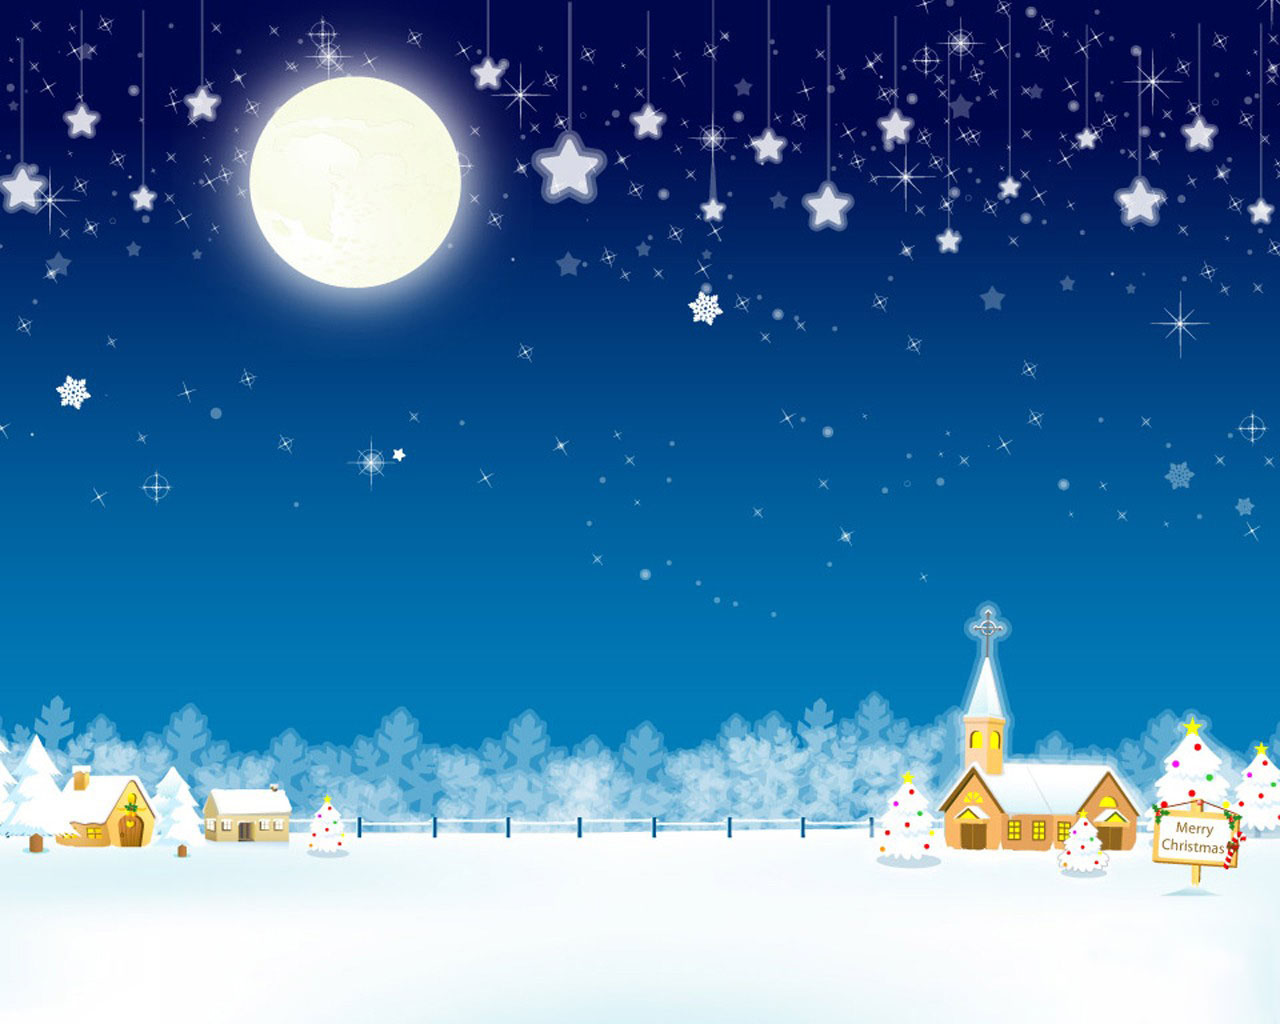 free animated Christmas background PowerPoint 1280x1024